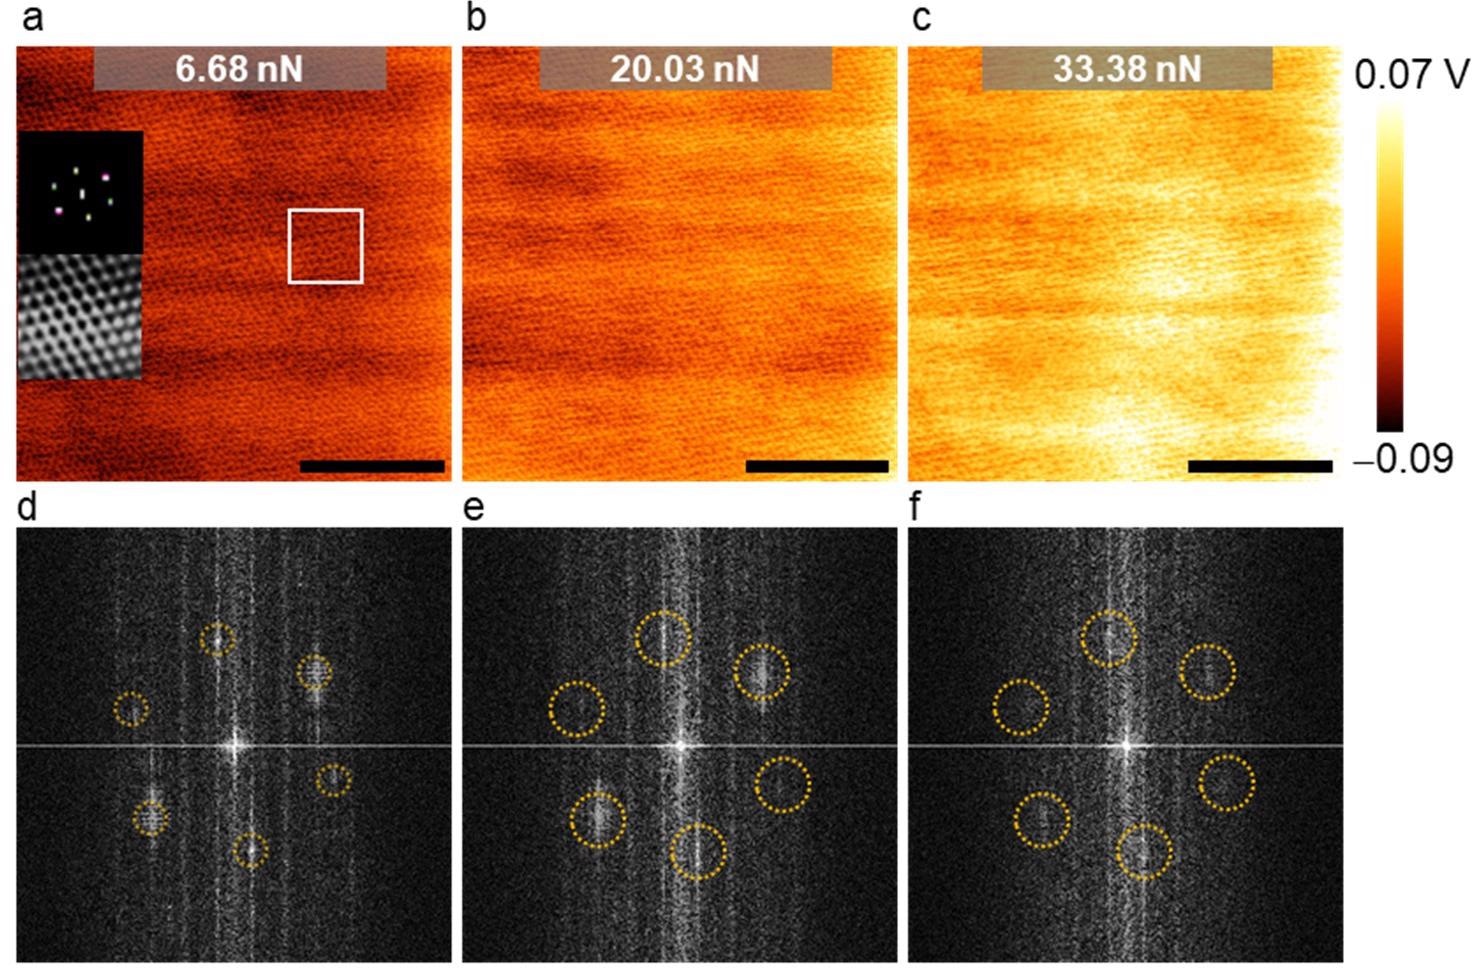 The effect of the load (i.e., setpoint) on LFM lattice images. (a–c) LFM raw data of MoS2 at various loads (calibrated scale bar: 5 nm; frequency: 17.1 Hz). The insets in (a) represent the filtered FFT images of the area enclosed by the white rectangle and its corresponding inverse FFT image; (d–f) corresponding unfiltered FFT images of MoS2. The six FFT spots associated with the hexagonal lattice structure are highlighted with dotted circles. The spots were less noticeable at a load of 33.38 nN, as seen in (f).